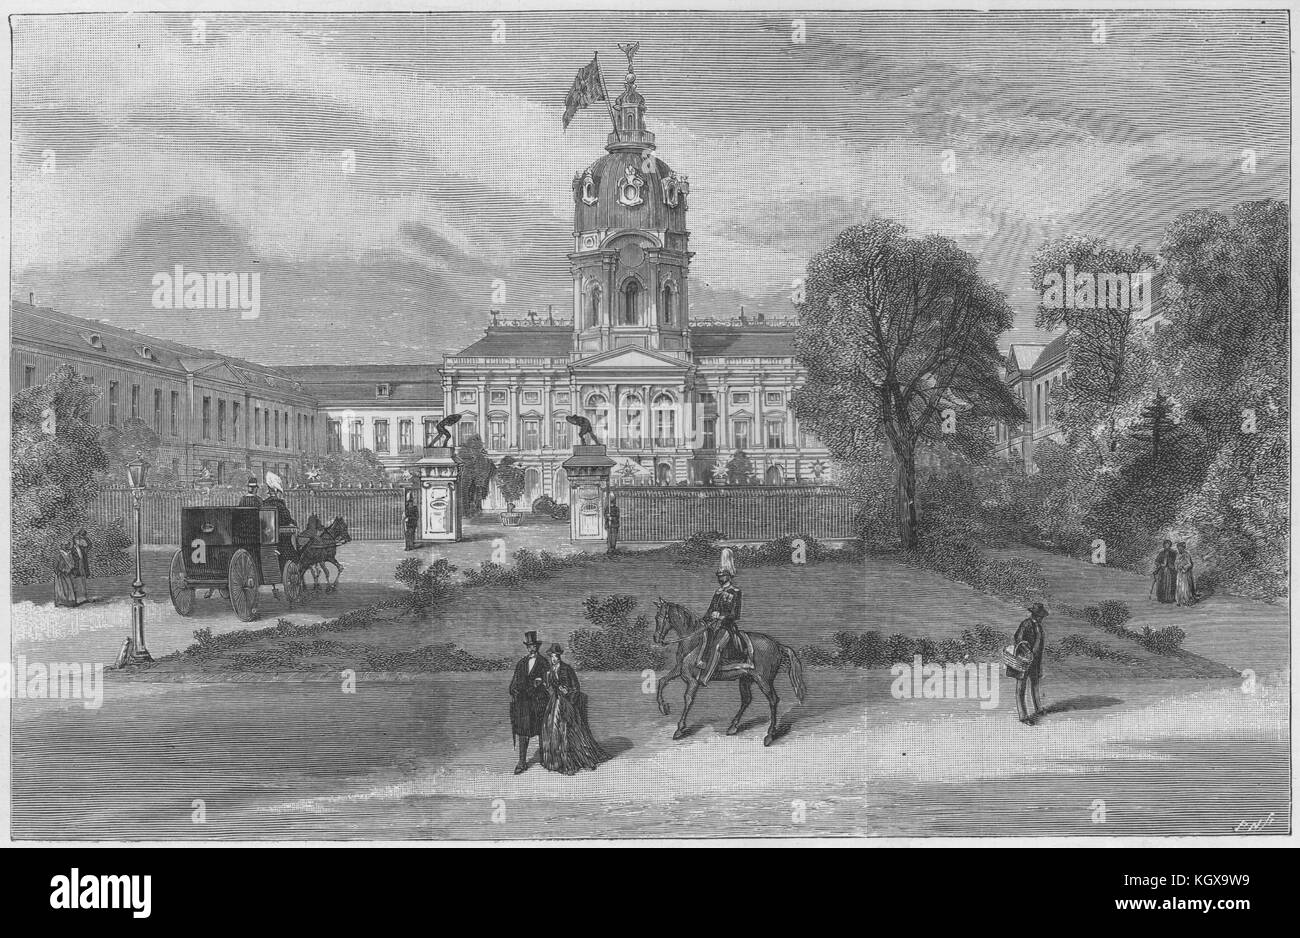 The Palace of Charlottenburg, Berlin. Germany 1888. The Illustrated London News Stock Photo